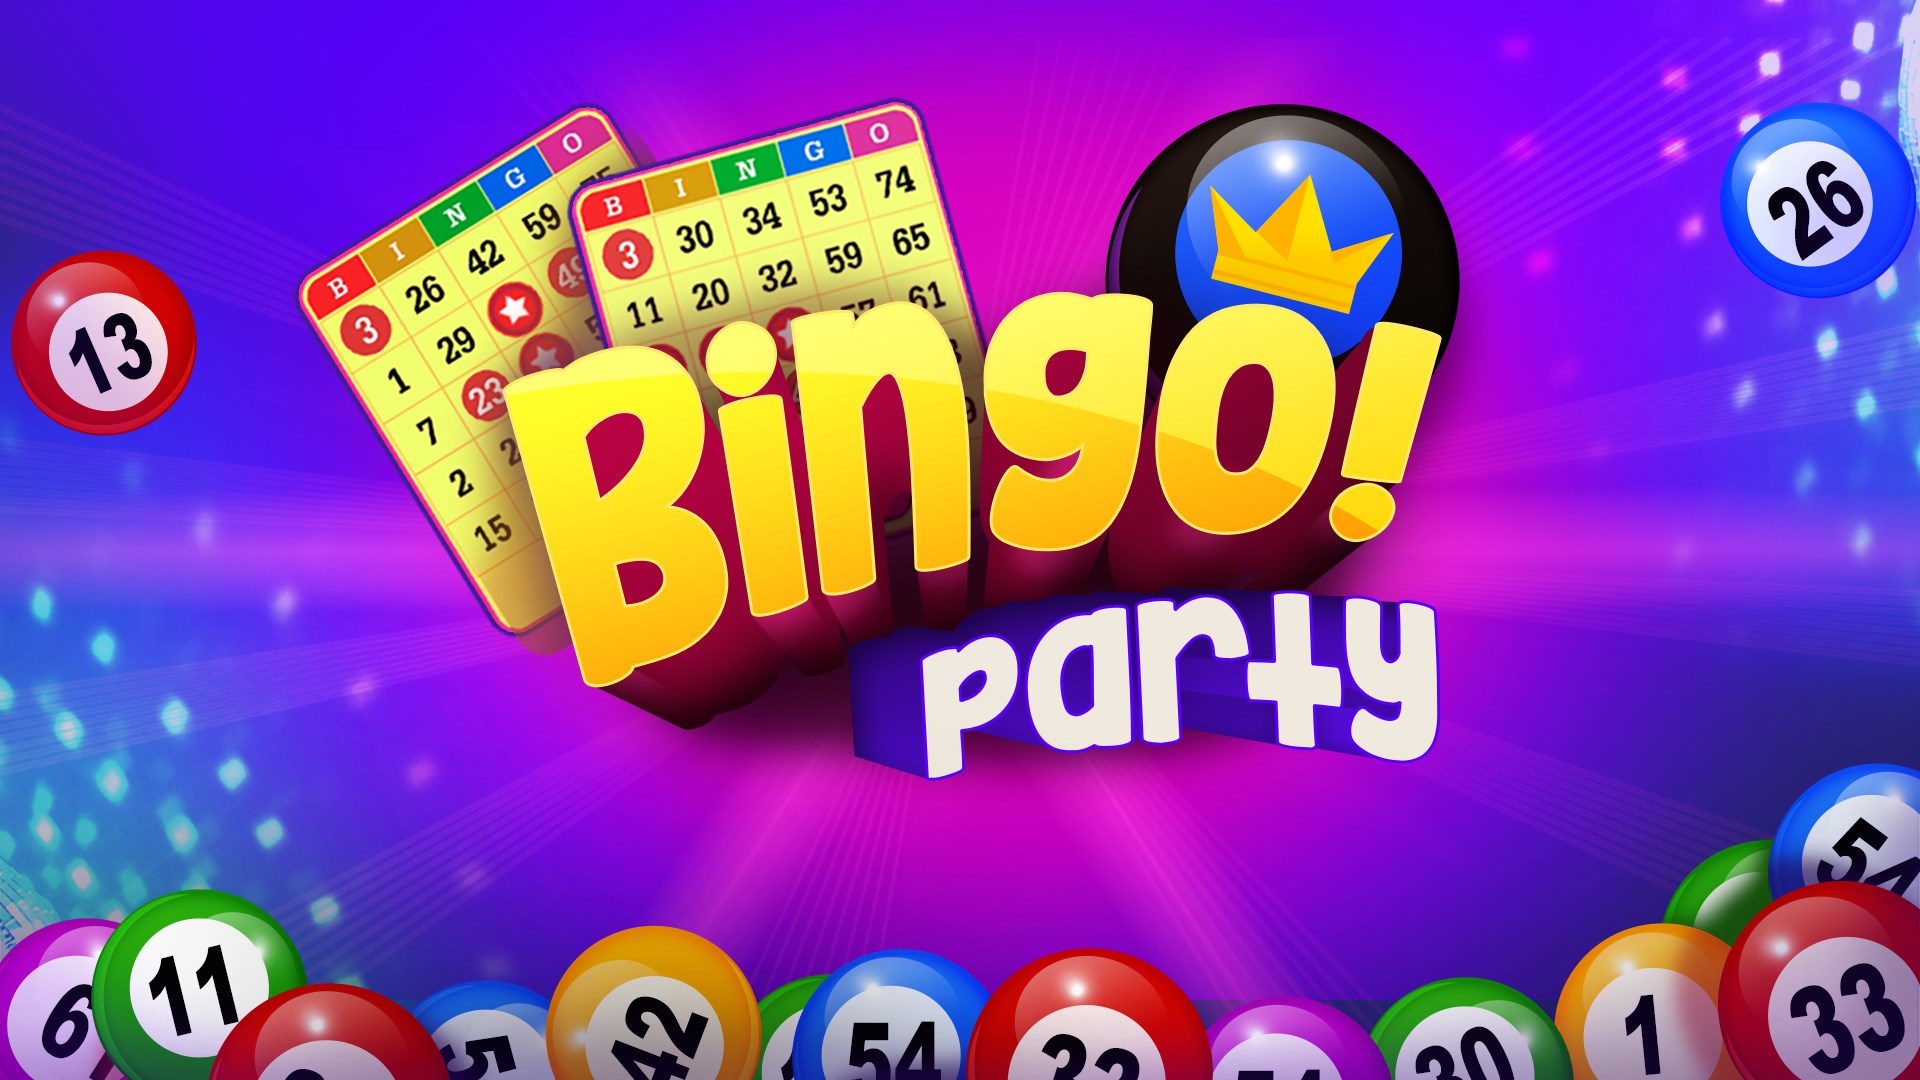 Grab Hot Deals And Offers For Bingo Through This